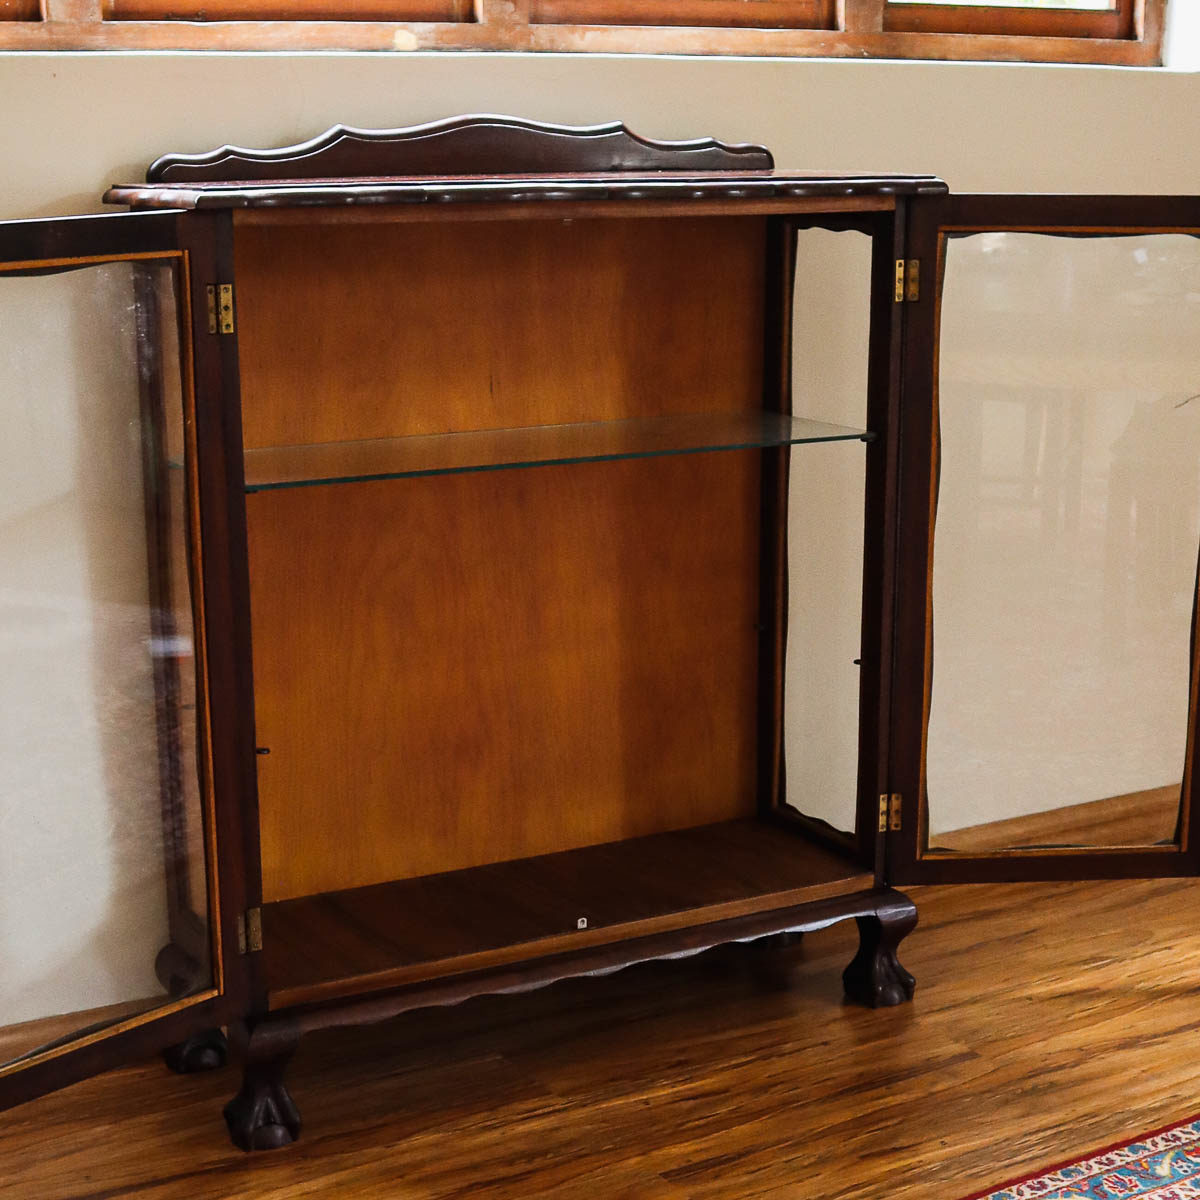 Old empty curio cabinet with glass doors and sides.